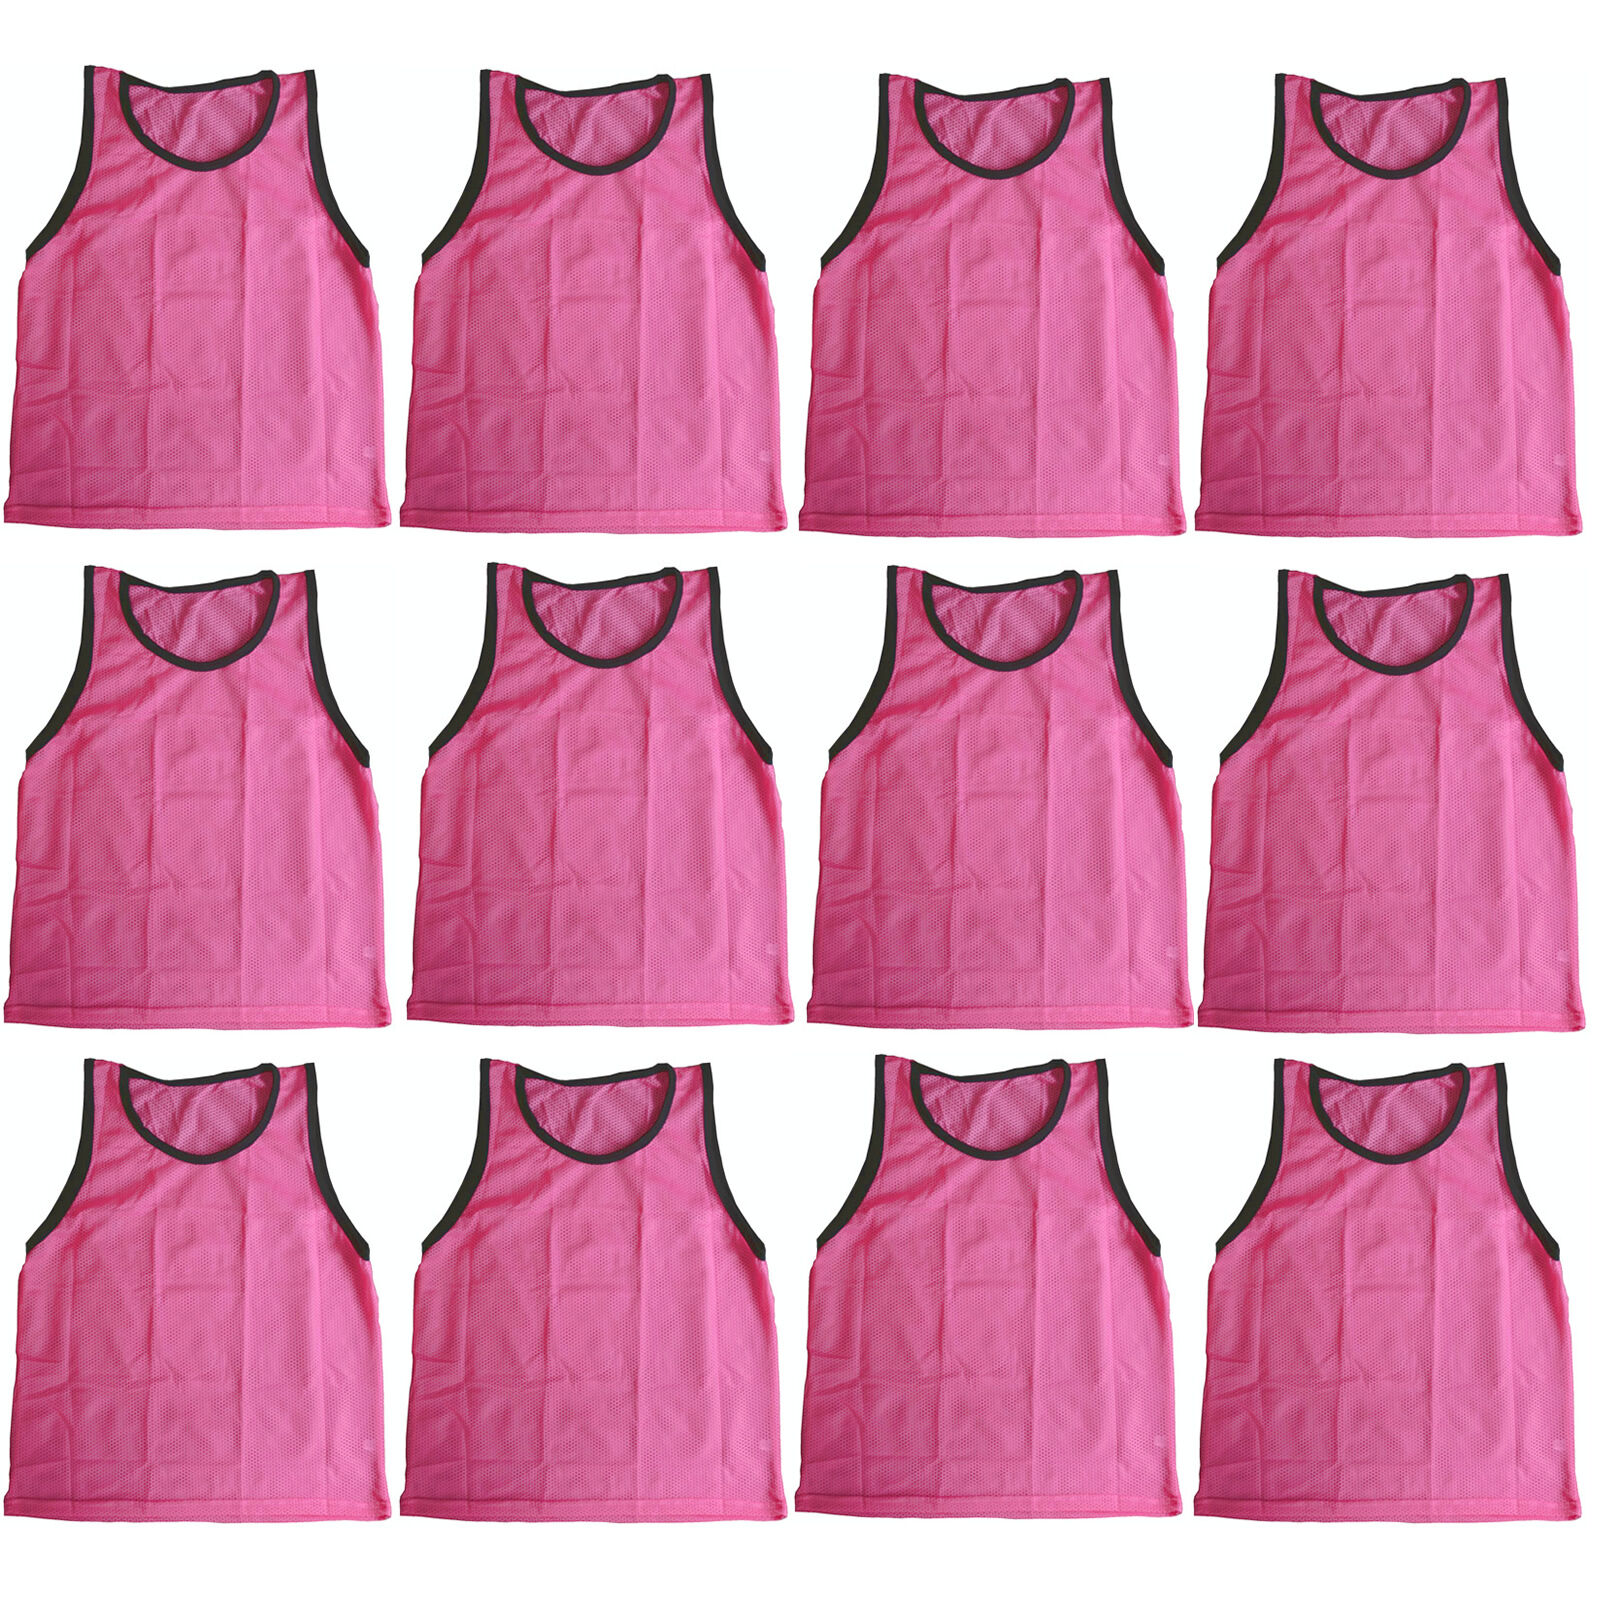 Great Choice Products 12 Girls Pink Scrimmage Vests Training Pinnies Soccer Softball Size Youth - New!